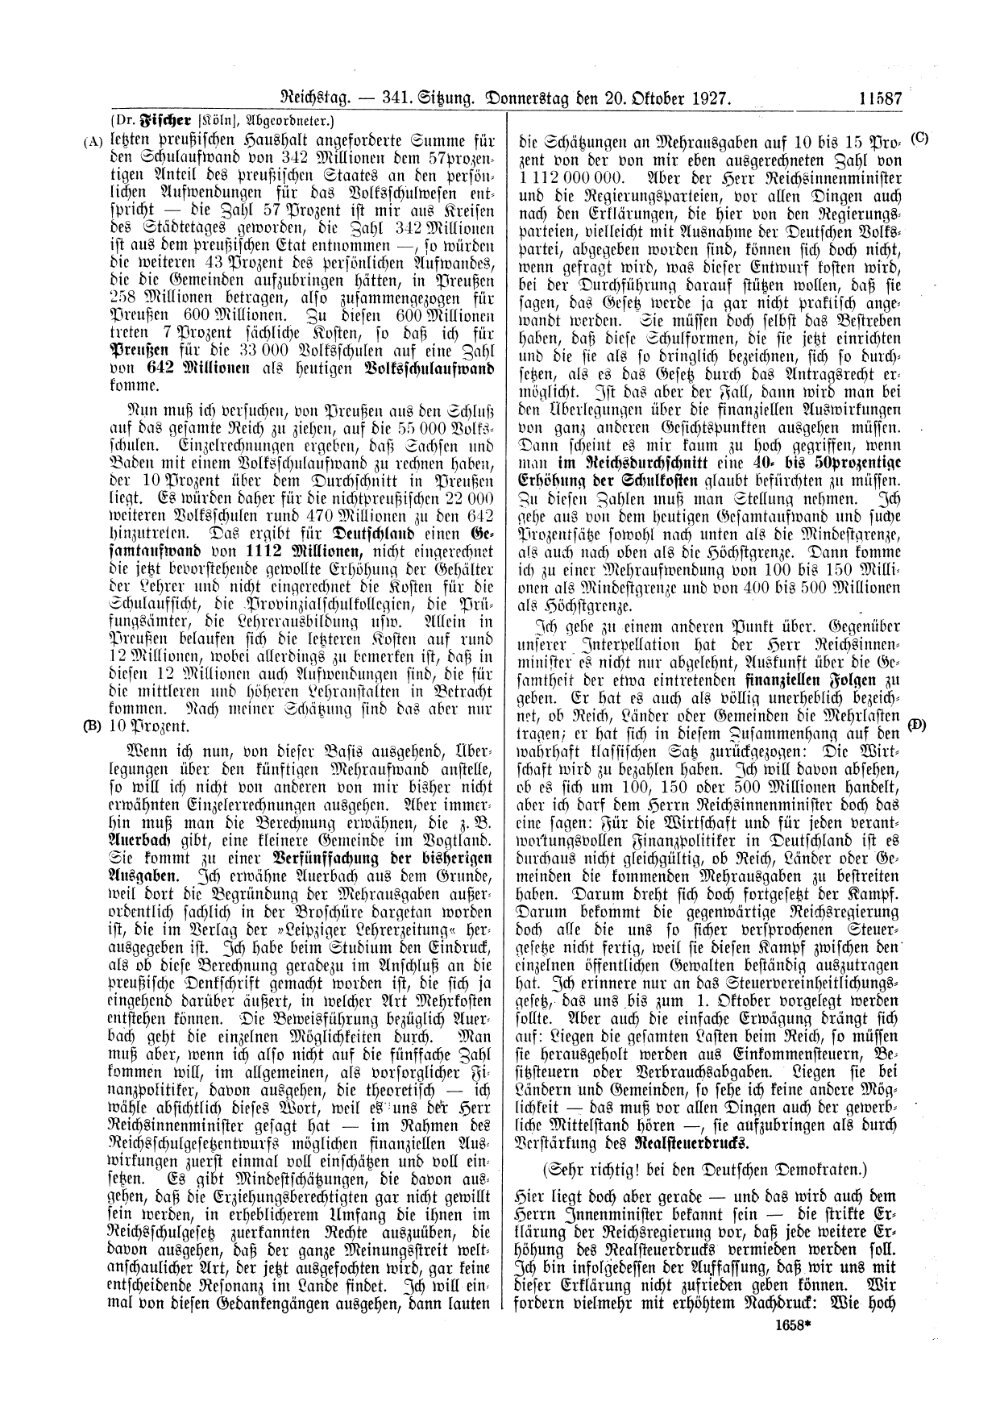 Scan of page 11587